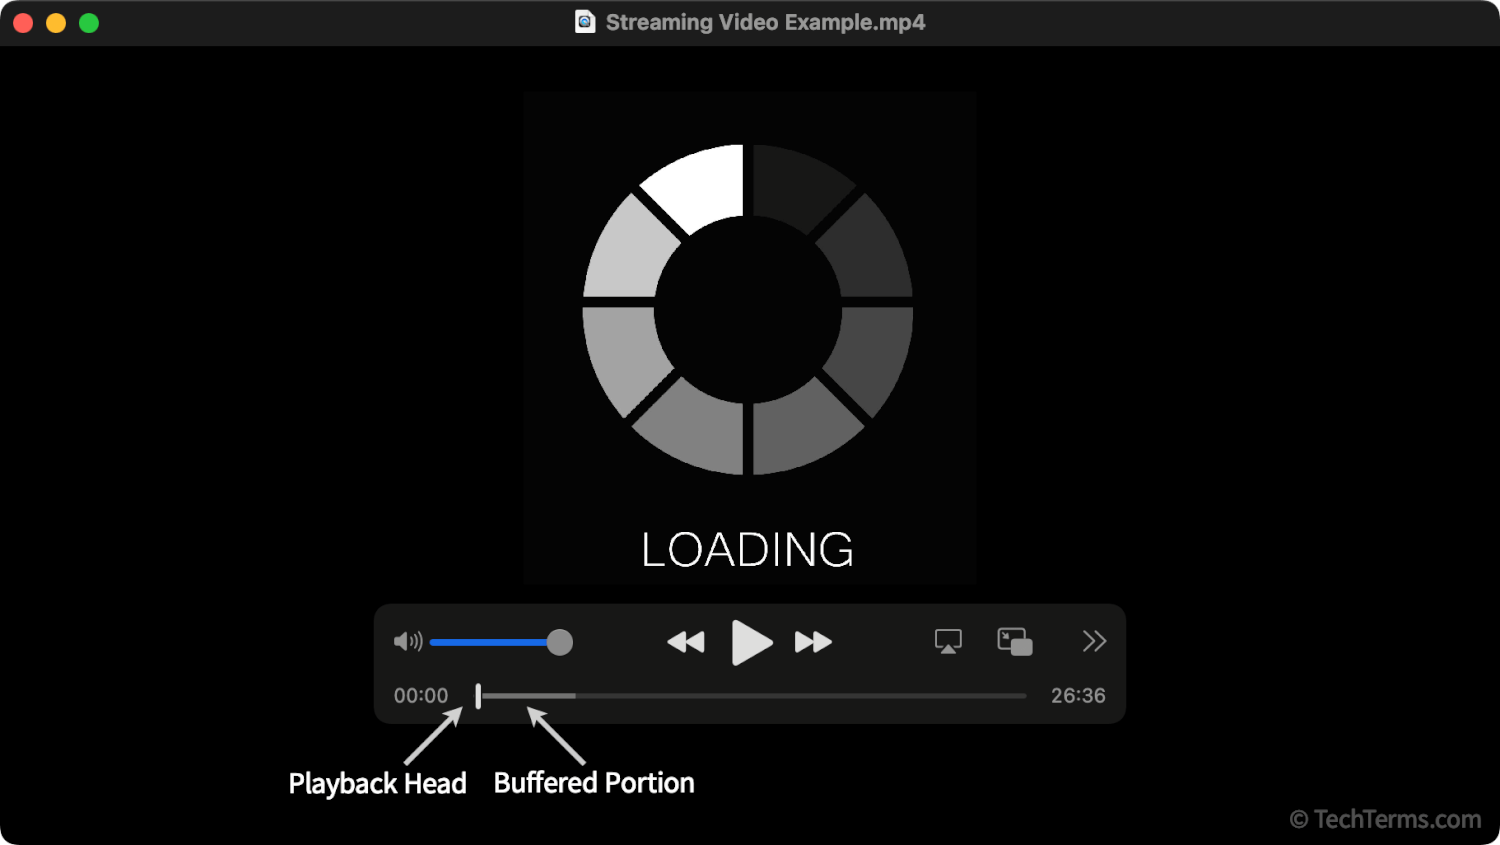 A streaming video buffering before playback